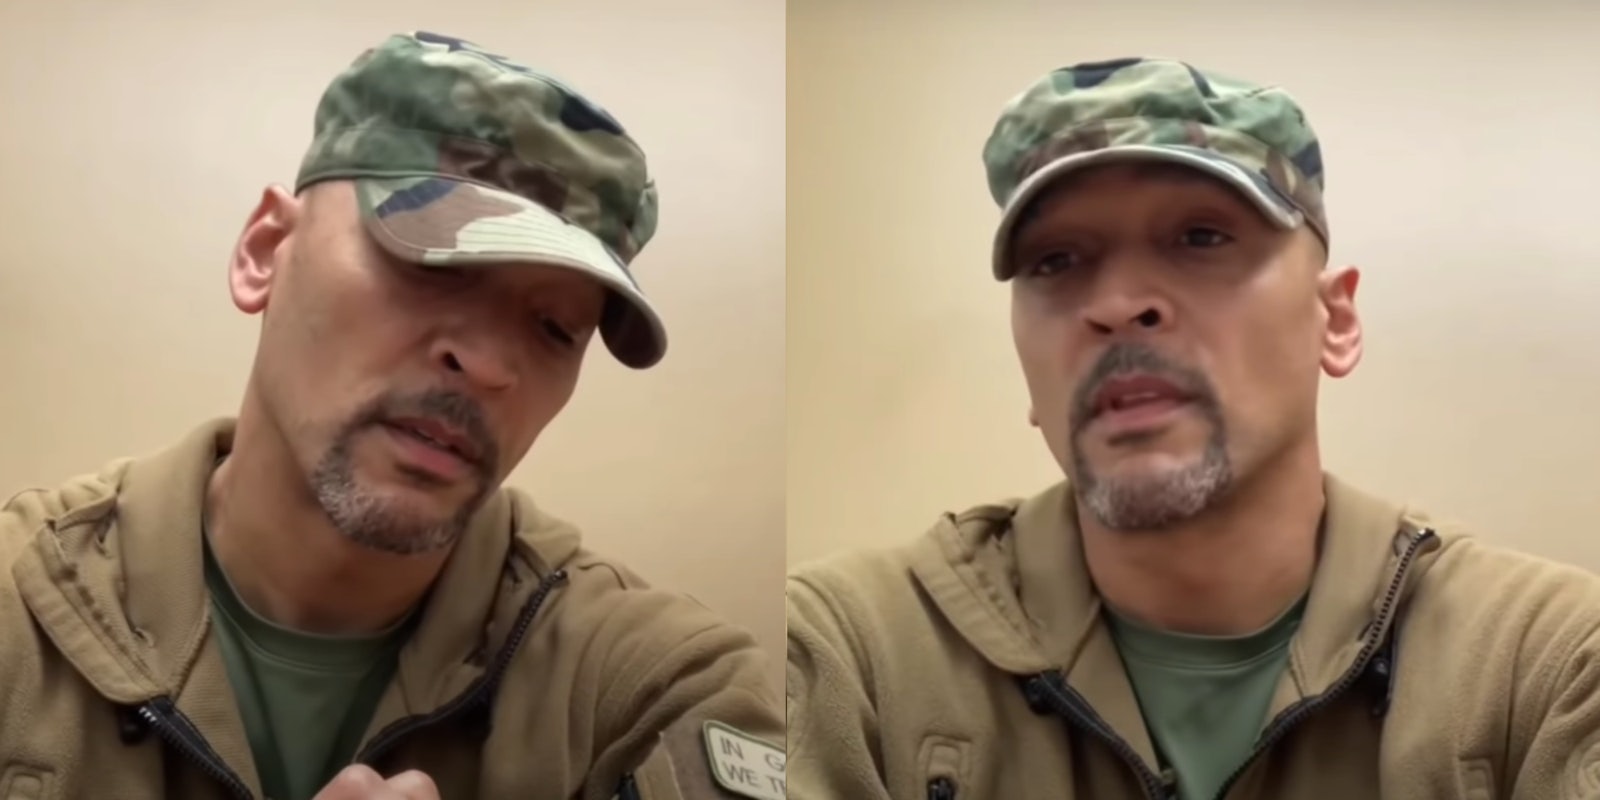 stills of clyde kerr III talking about racism and police brutality before dying by suicide